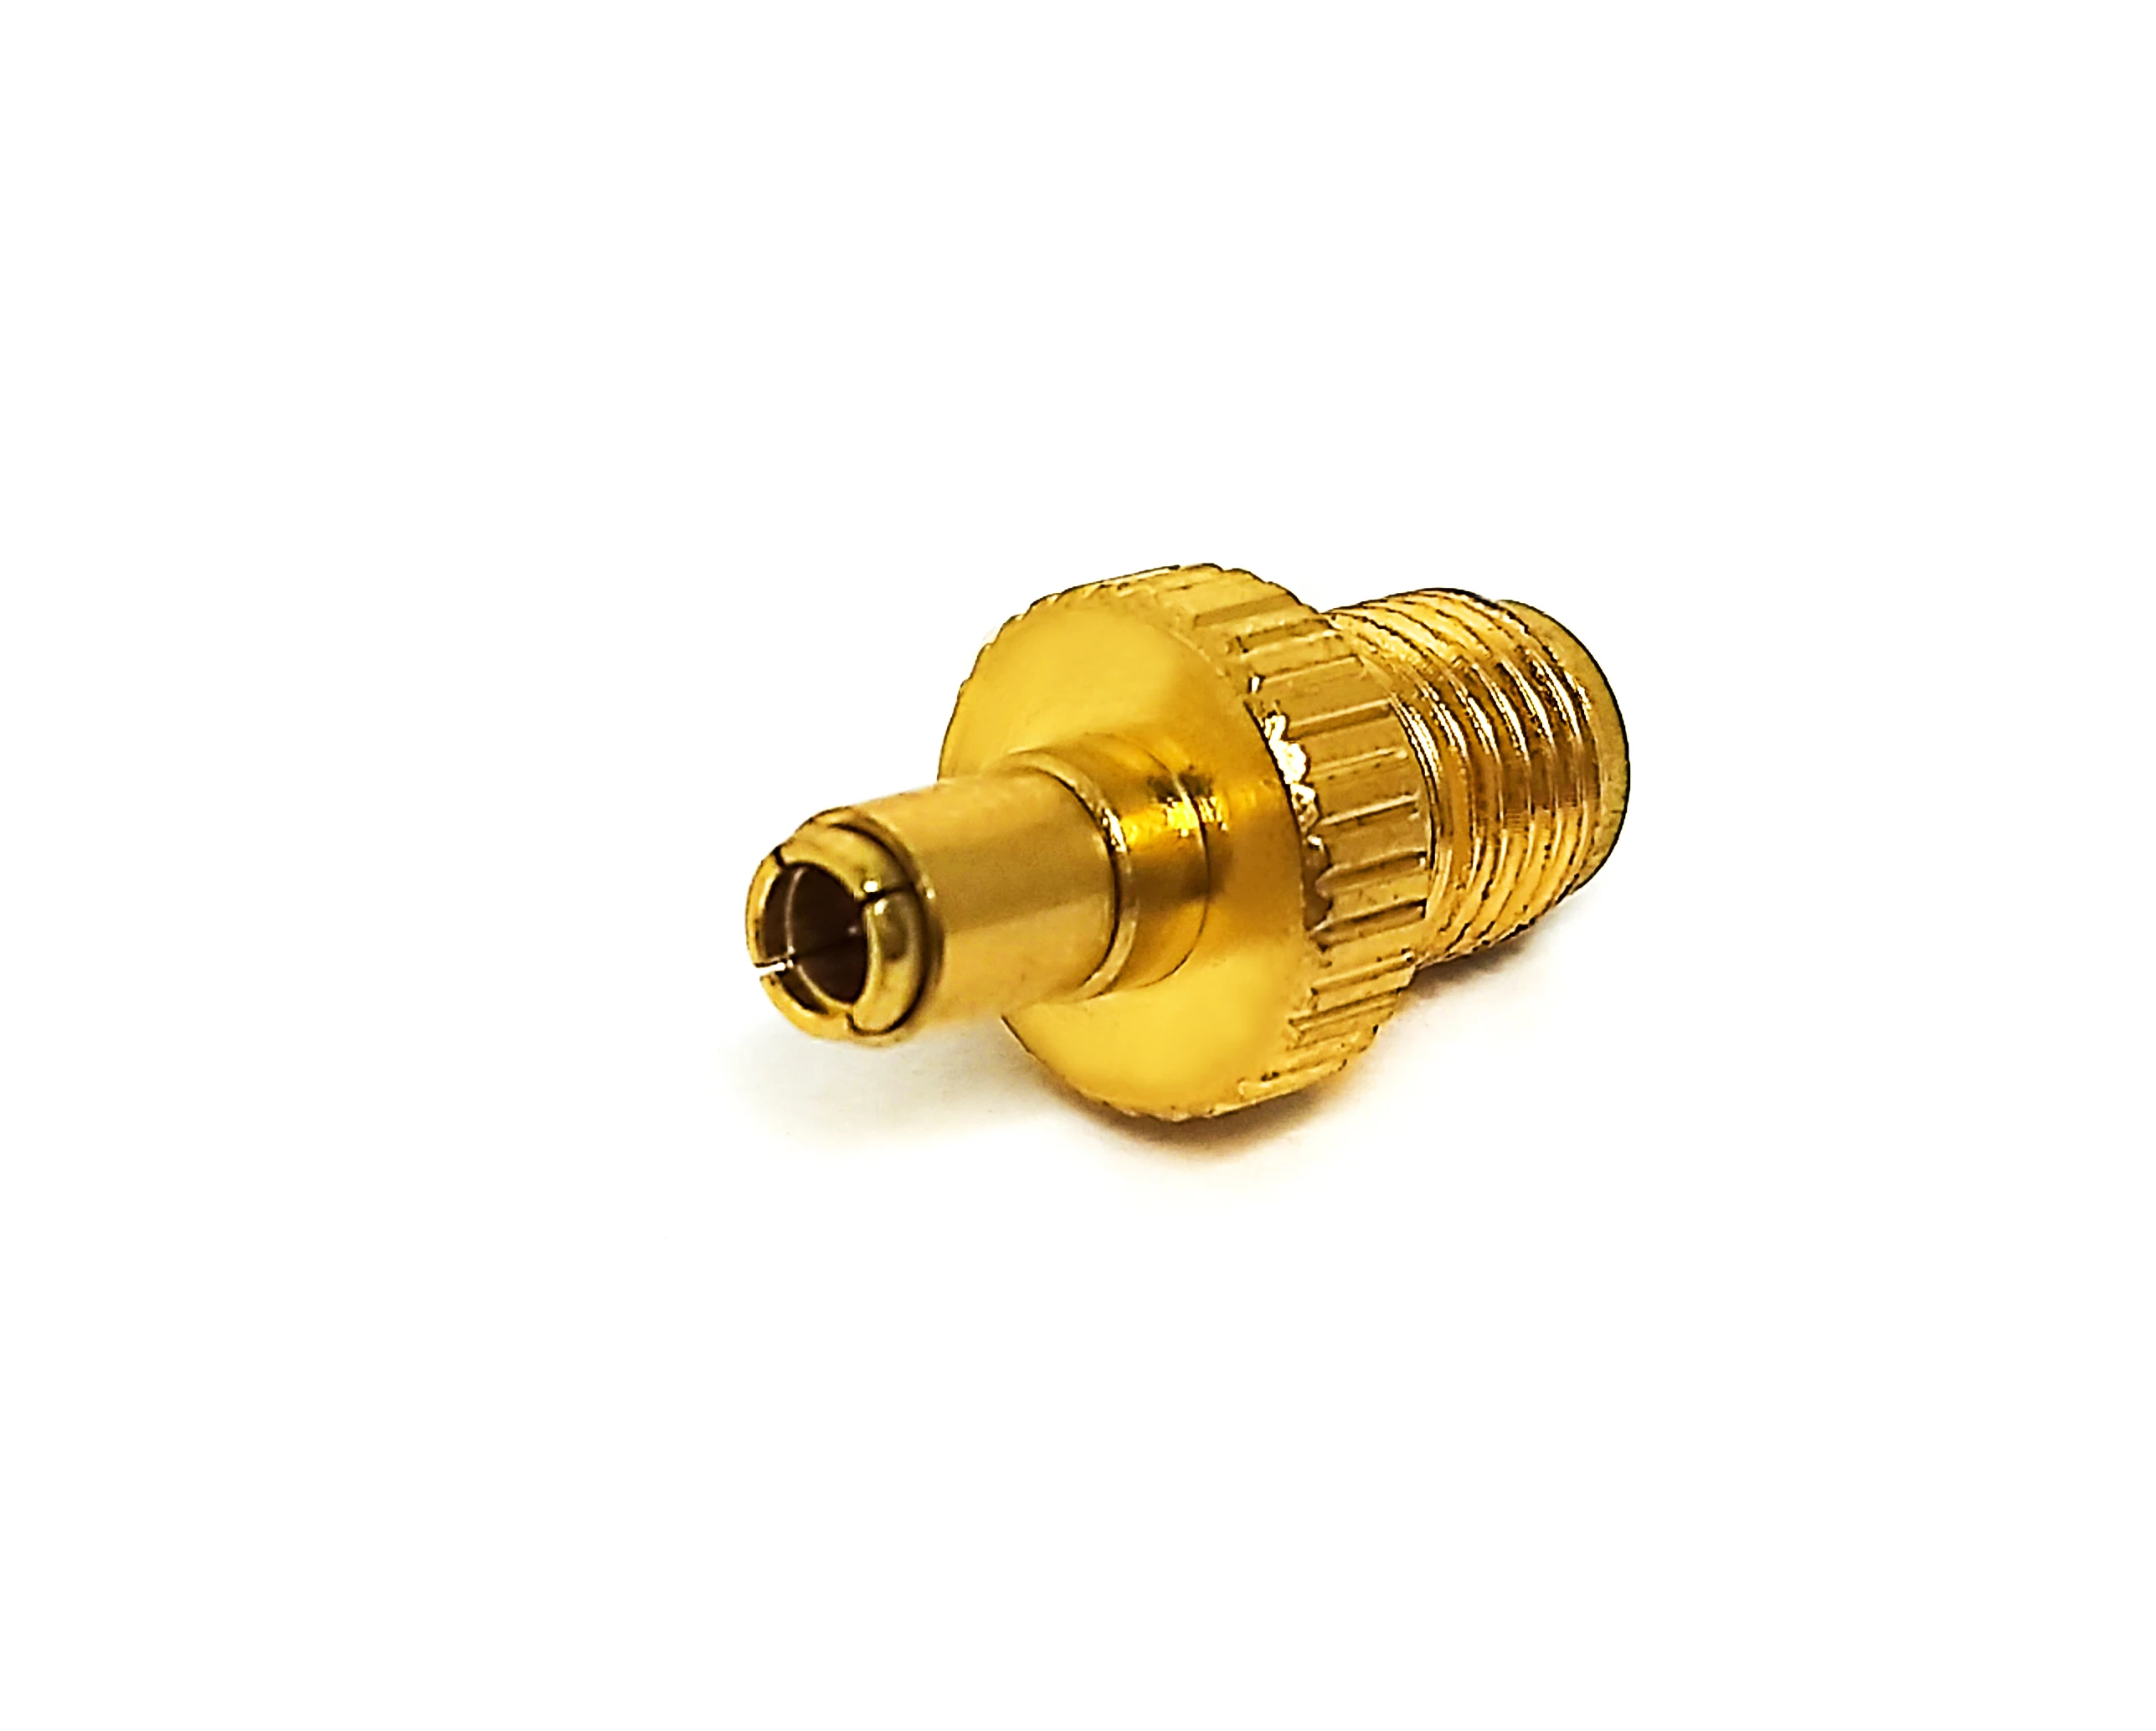 Reversed Polarity SMA Female RP SMA Jack To TS9 Male Gold Plated Adapter Connector manufacture